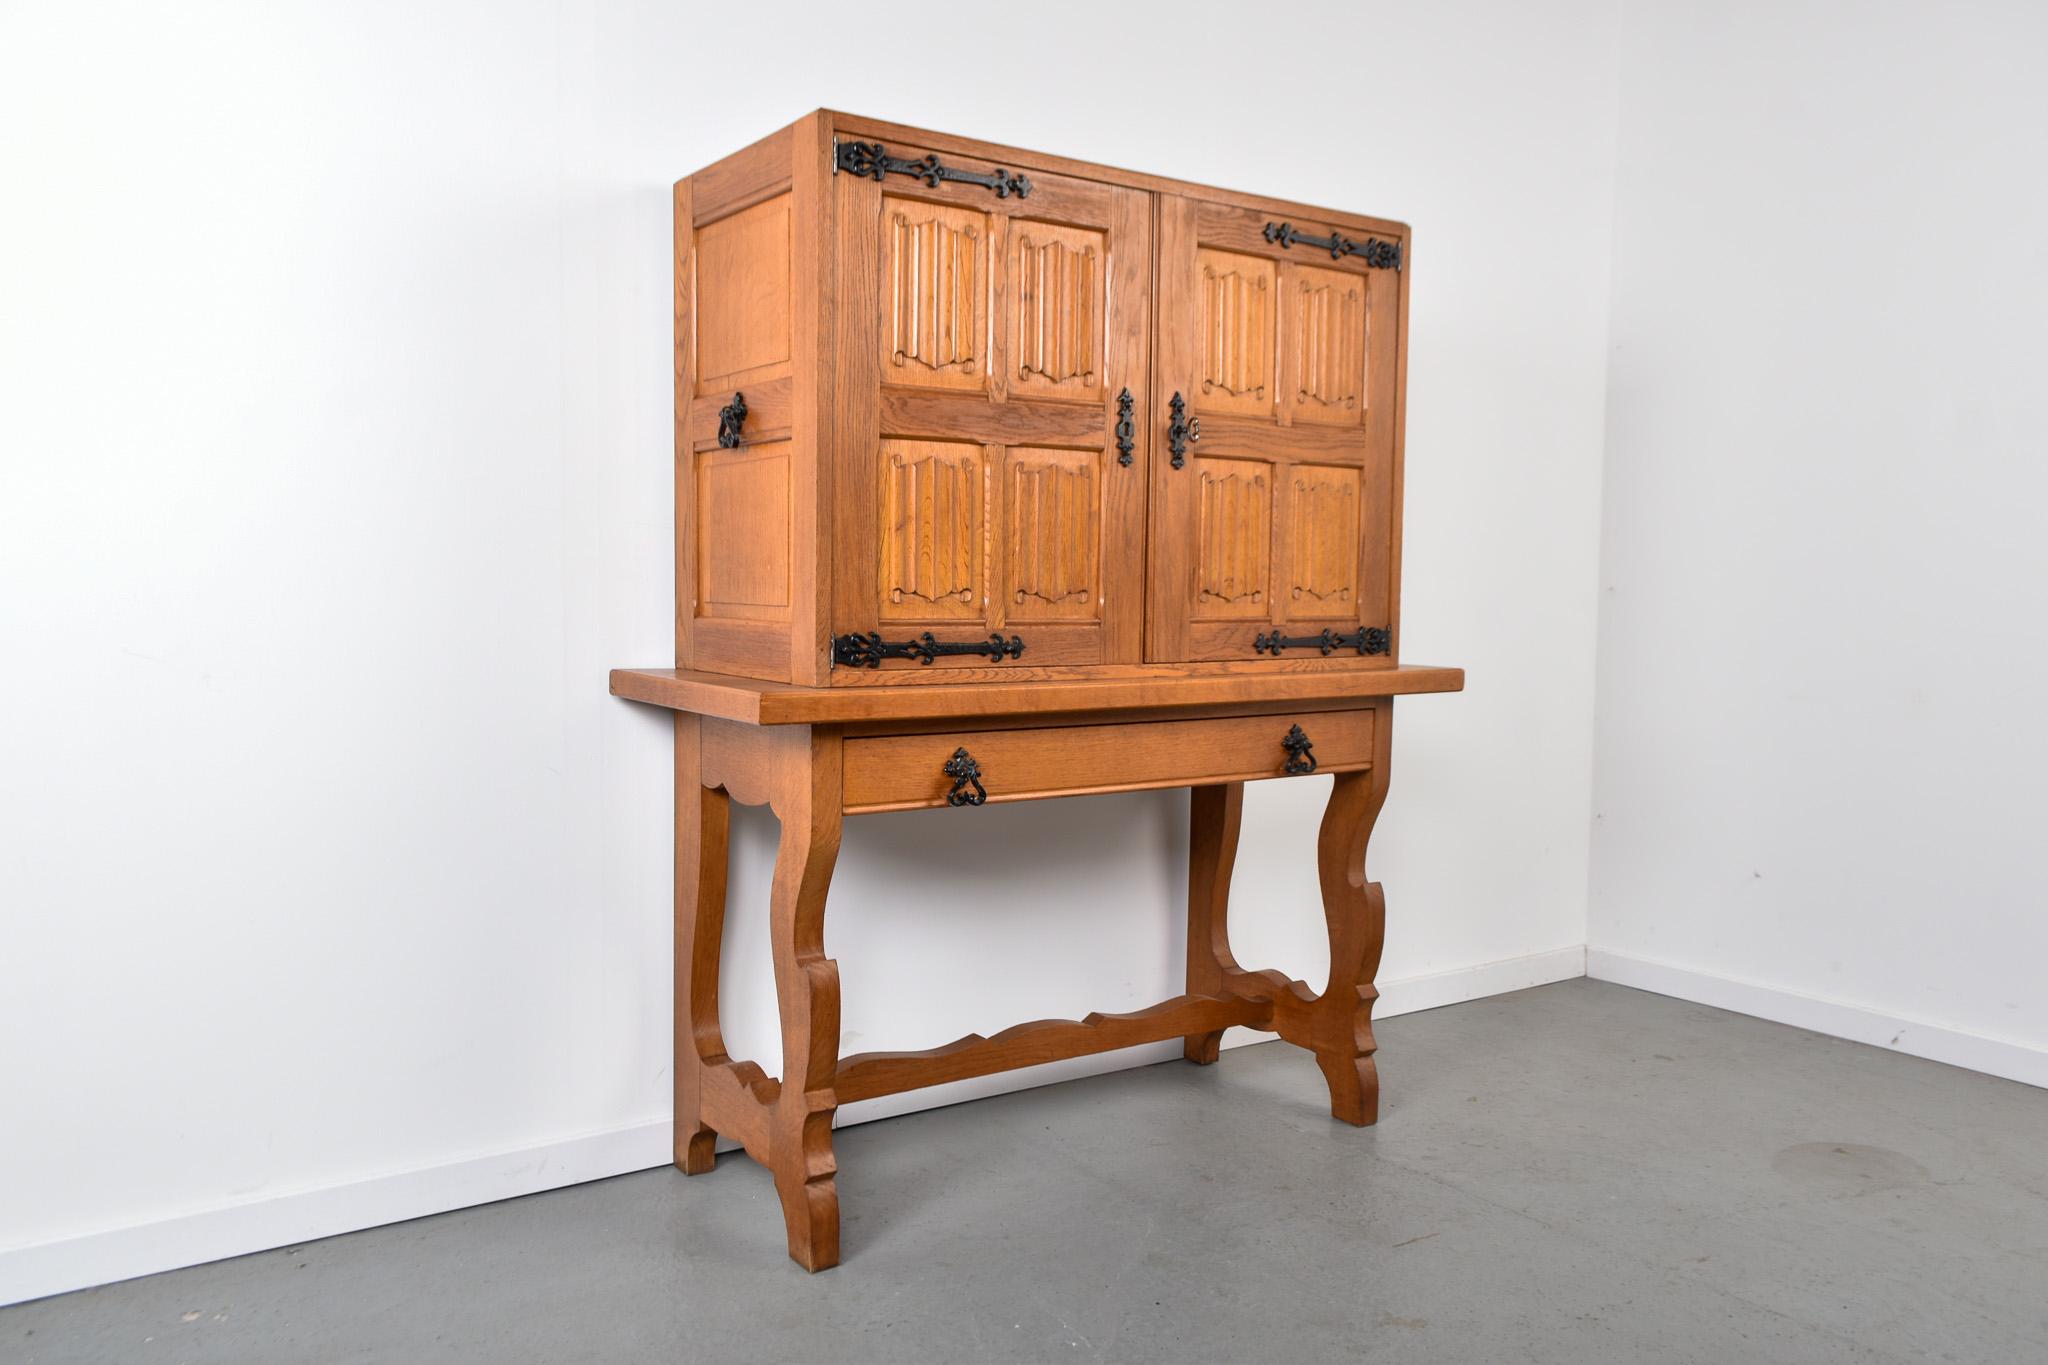 Spanish Oak barcabinet made in the 1970's

In very good condition